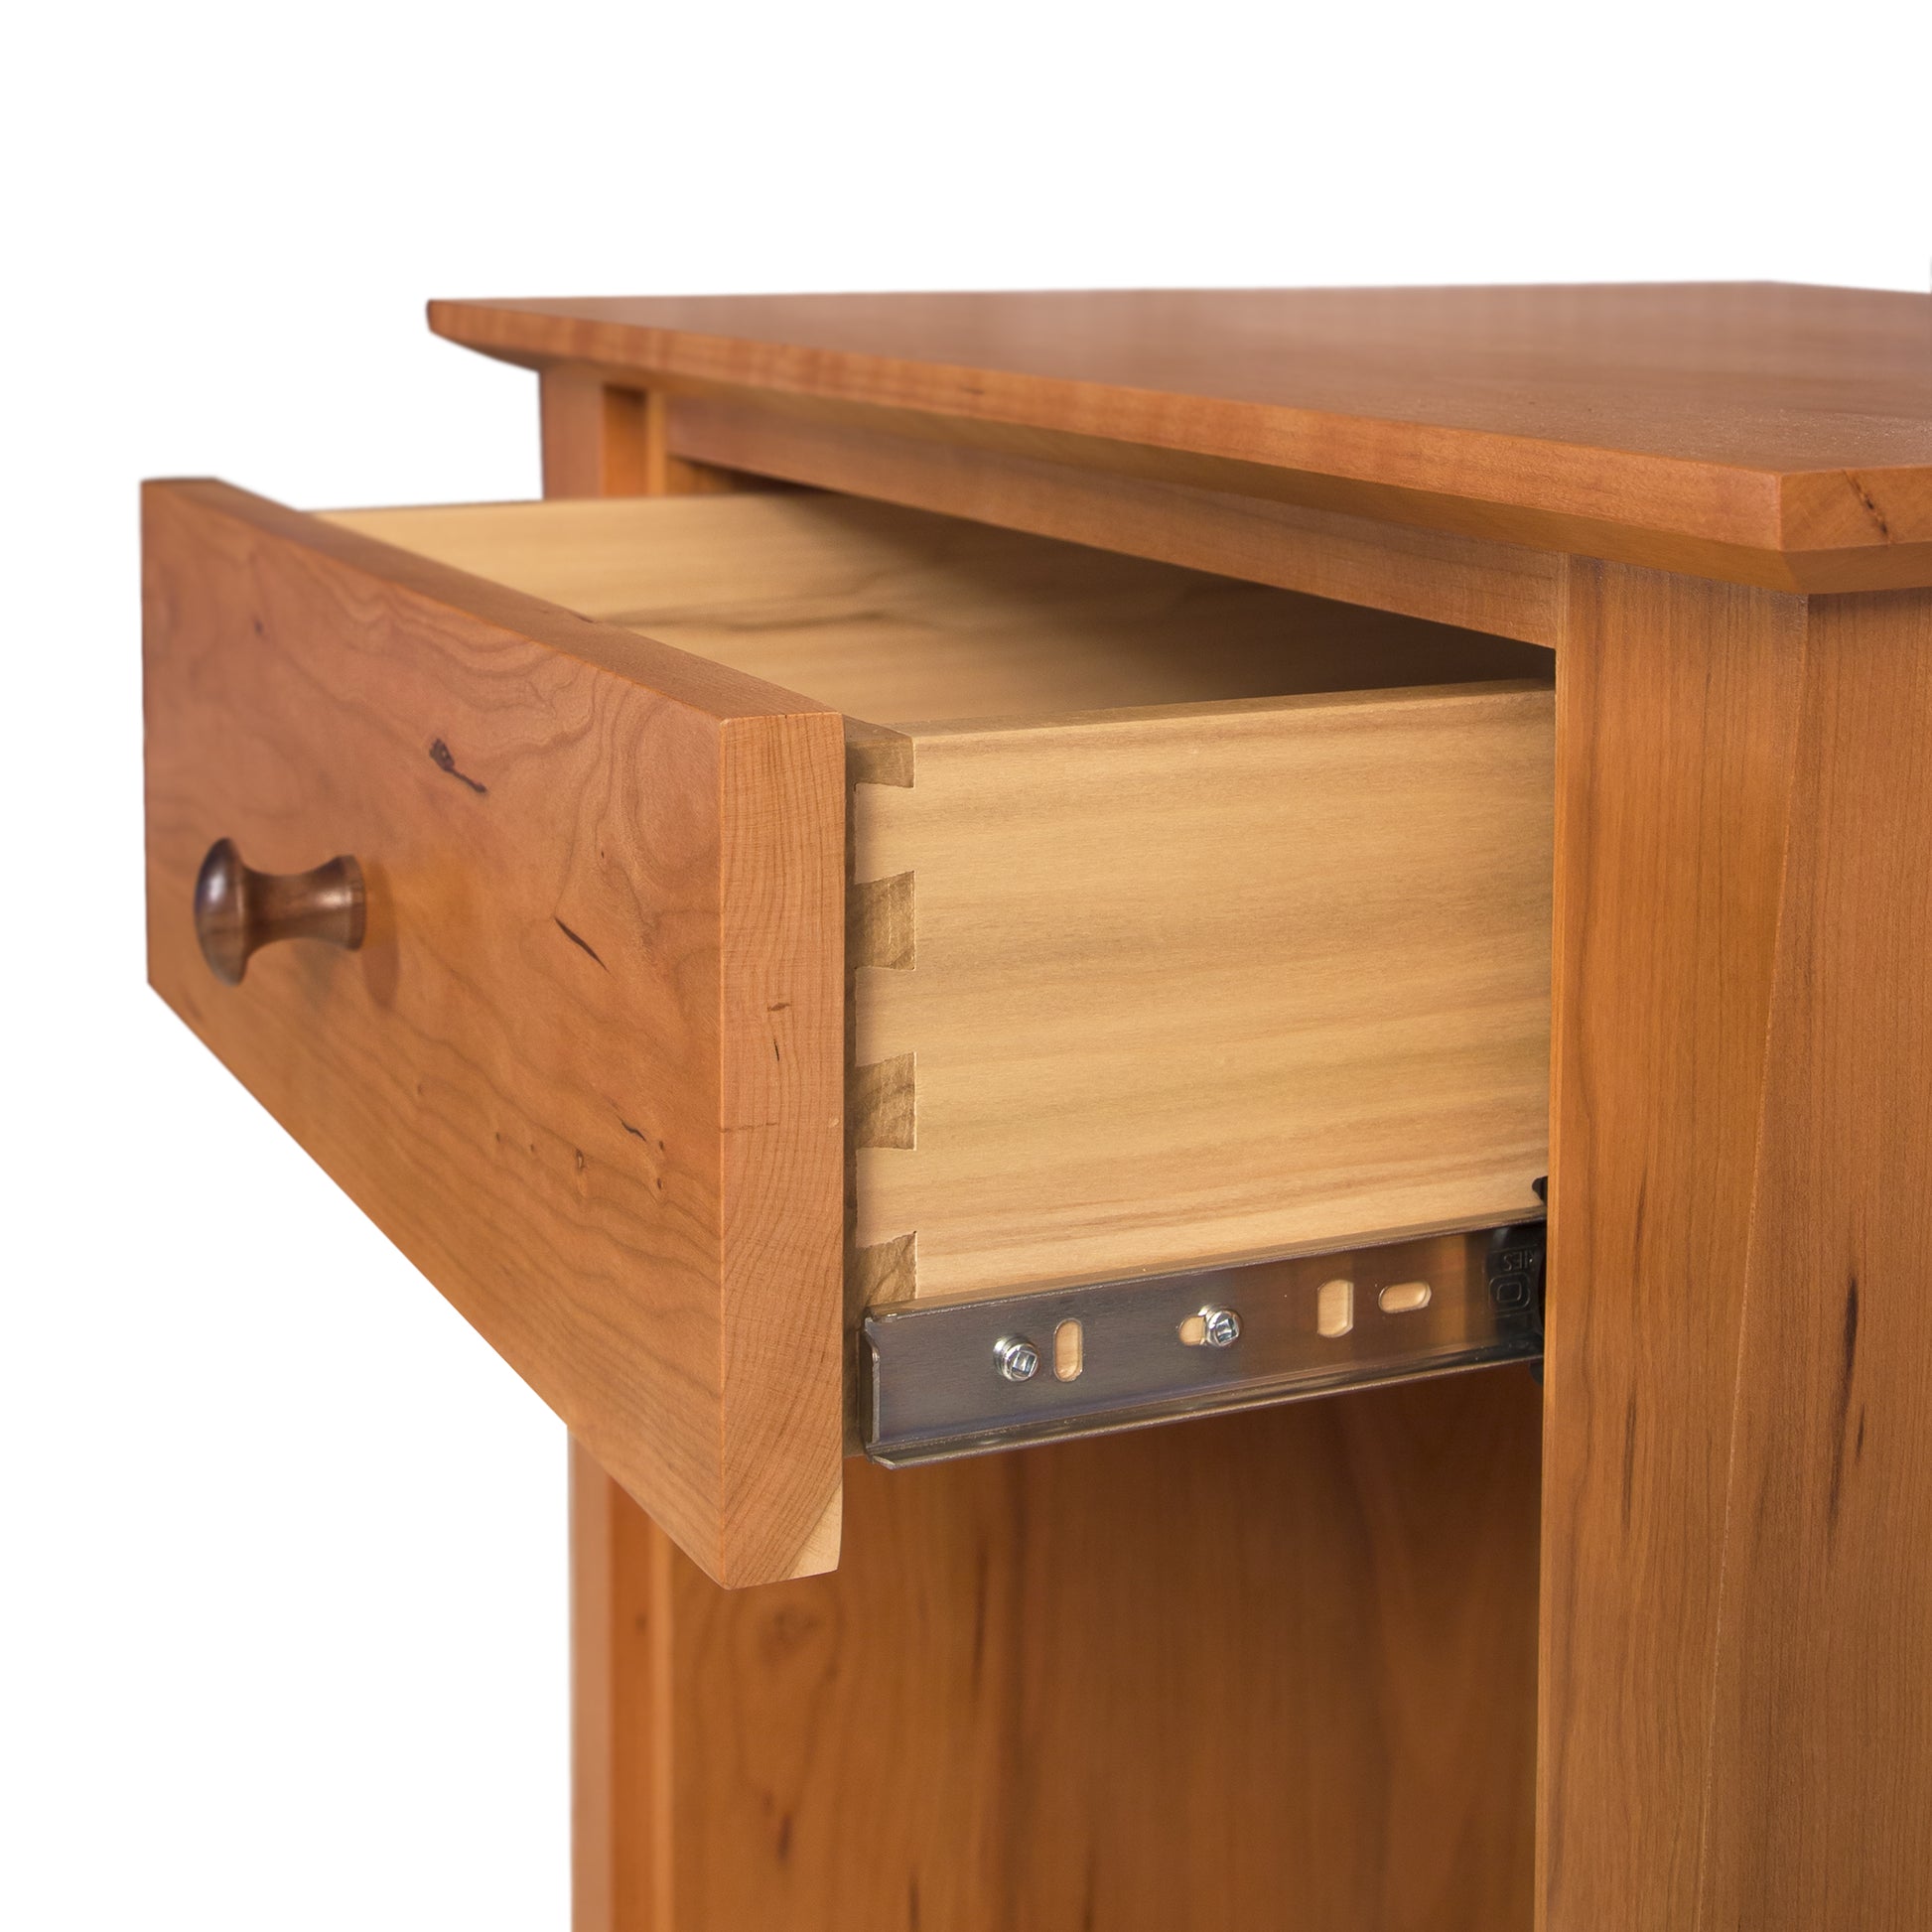 A Lyndon Furniture handmade nightstand crafted from natural hardwoods, featuring storage space with the Andrews 1-Drawer Enclosed Shelf.